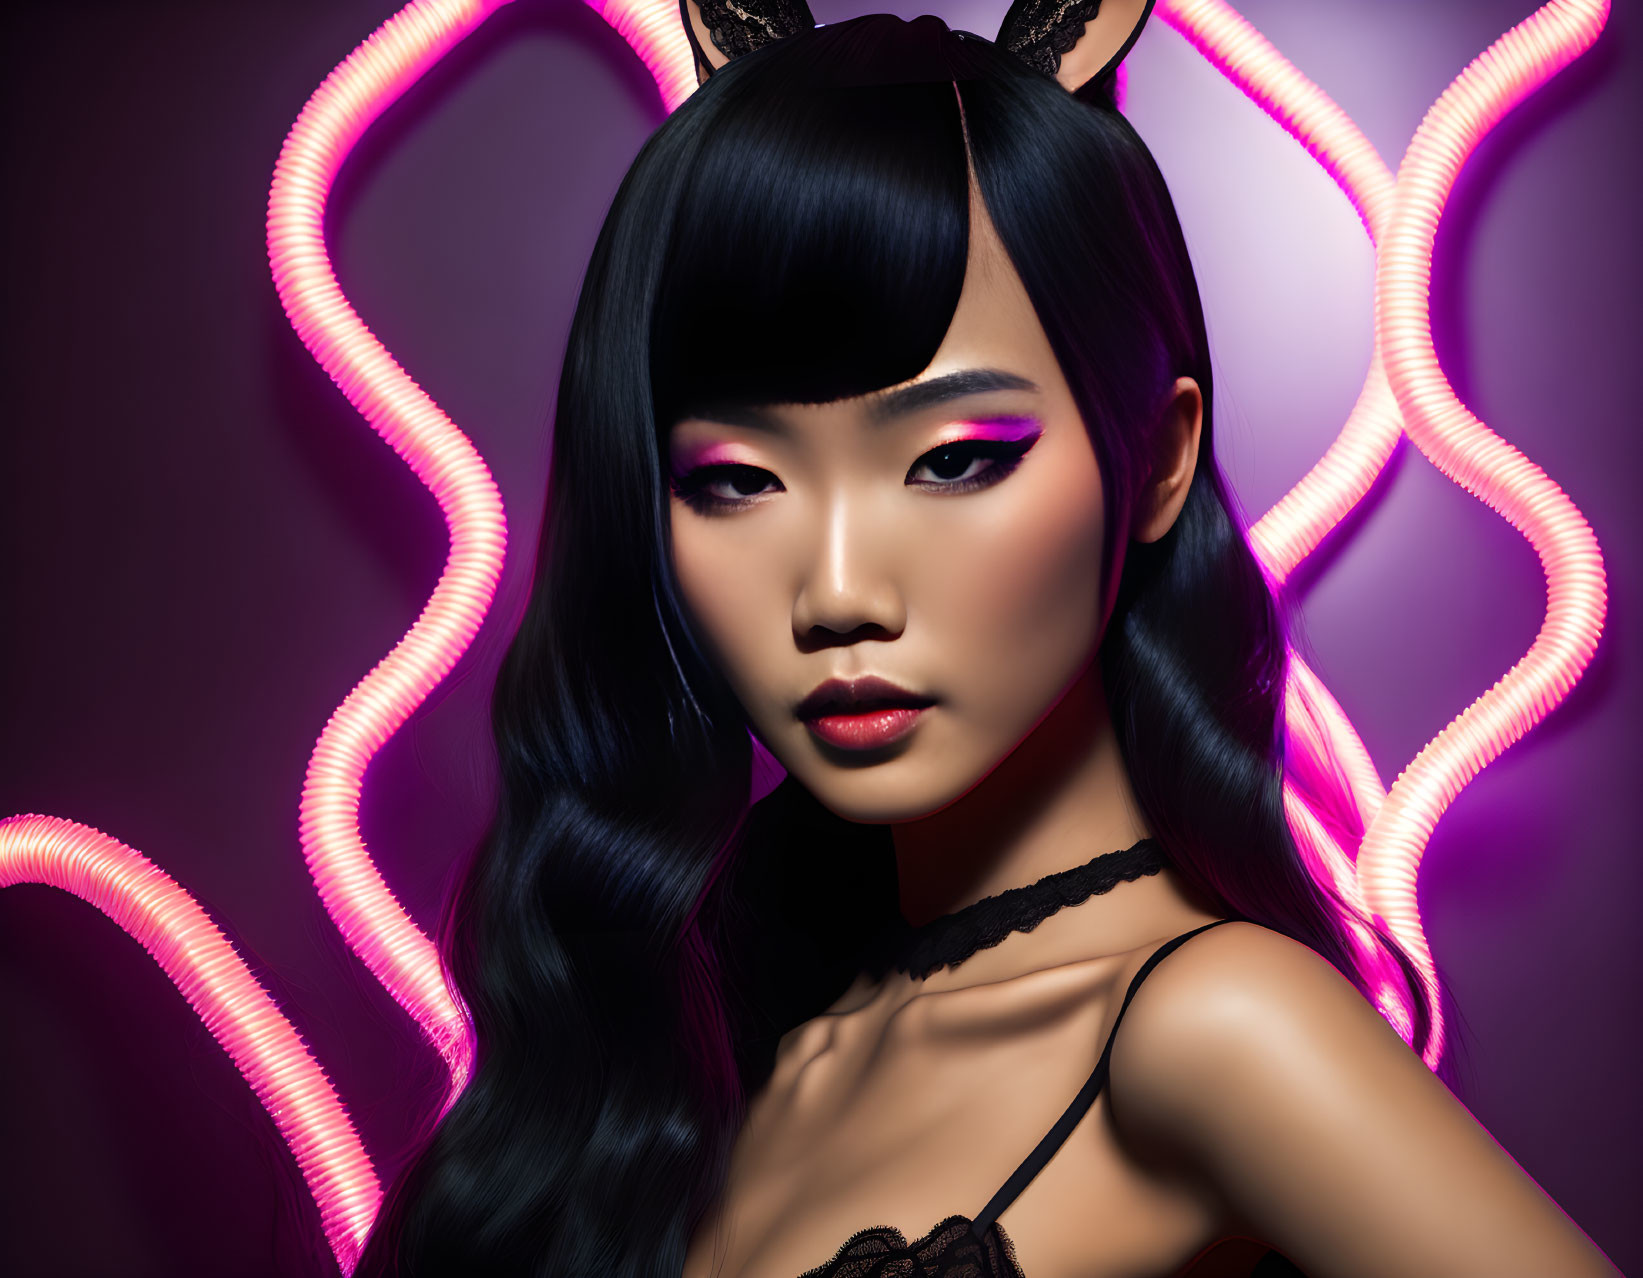 Dark-haired woman with pink eyeshadow and bunny ears in neon-lit 3D illustration